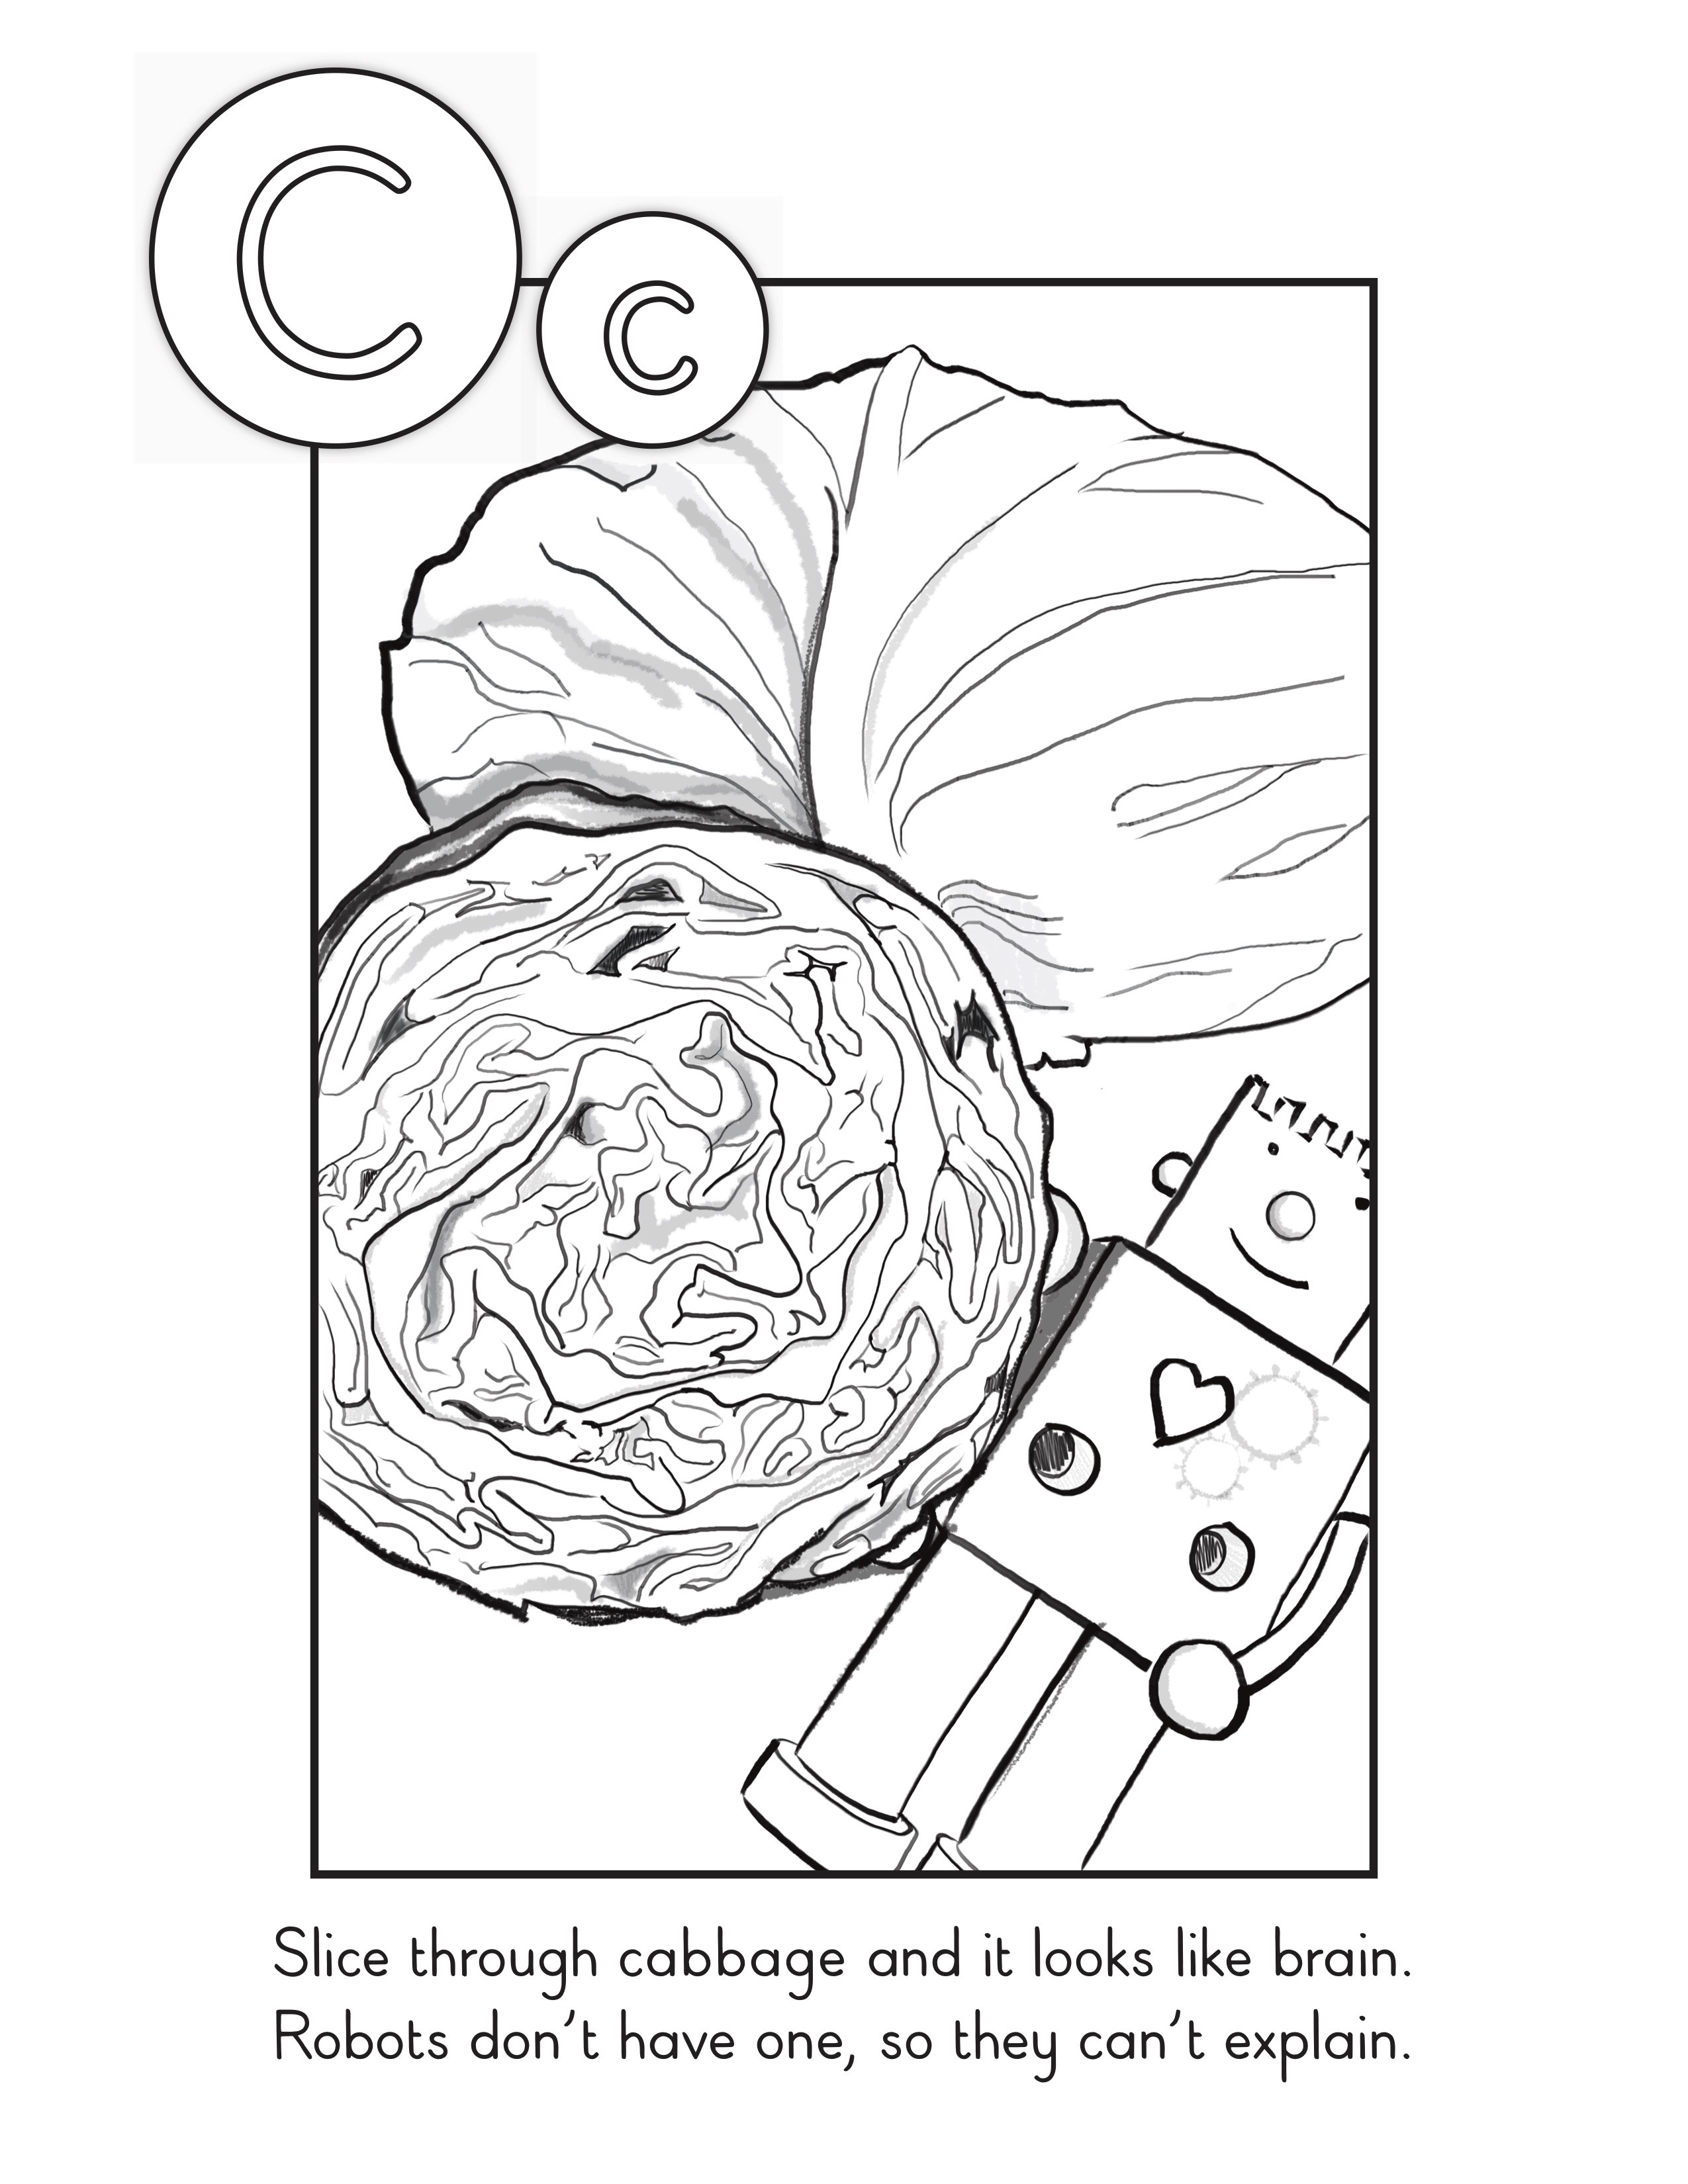 Letter "C" coloring page